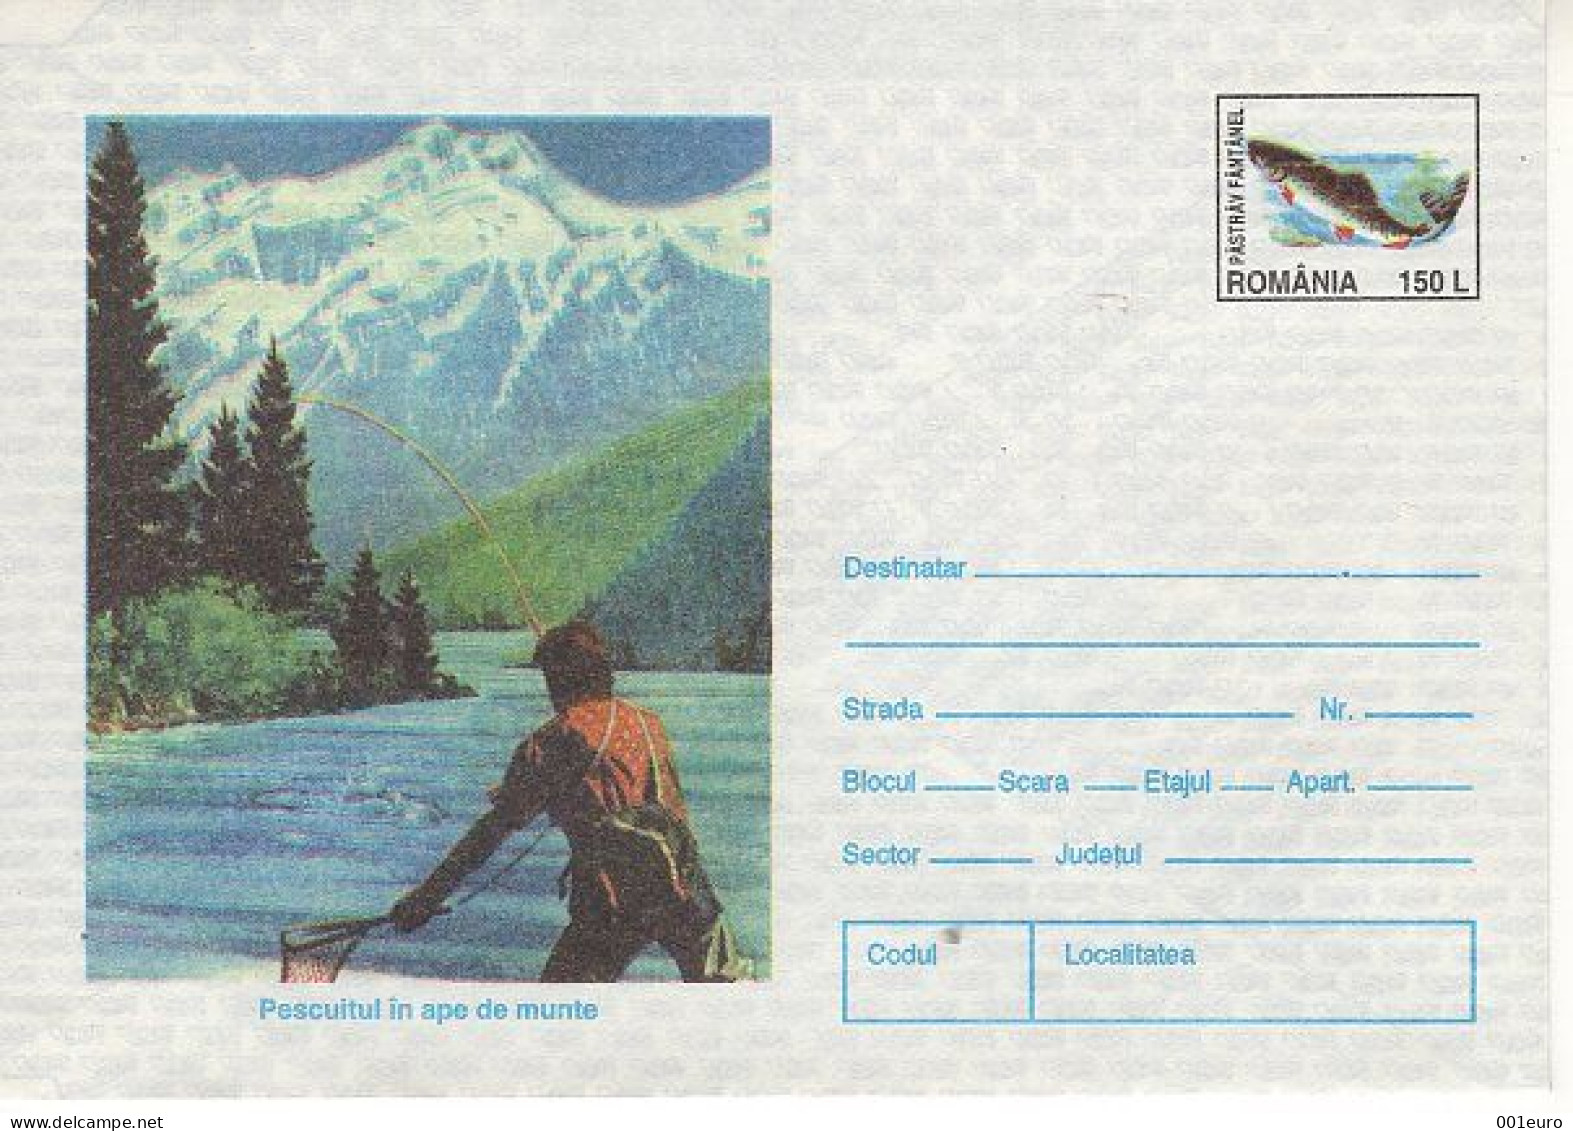 ROMANIA 136x1996: TROUT ANGLING, MOUNTAIN RIVER, Unused Prepaid Postal Stationery Cover - Registered Shipping! - Ganzsachen